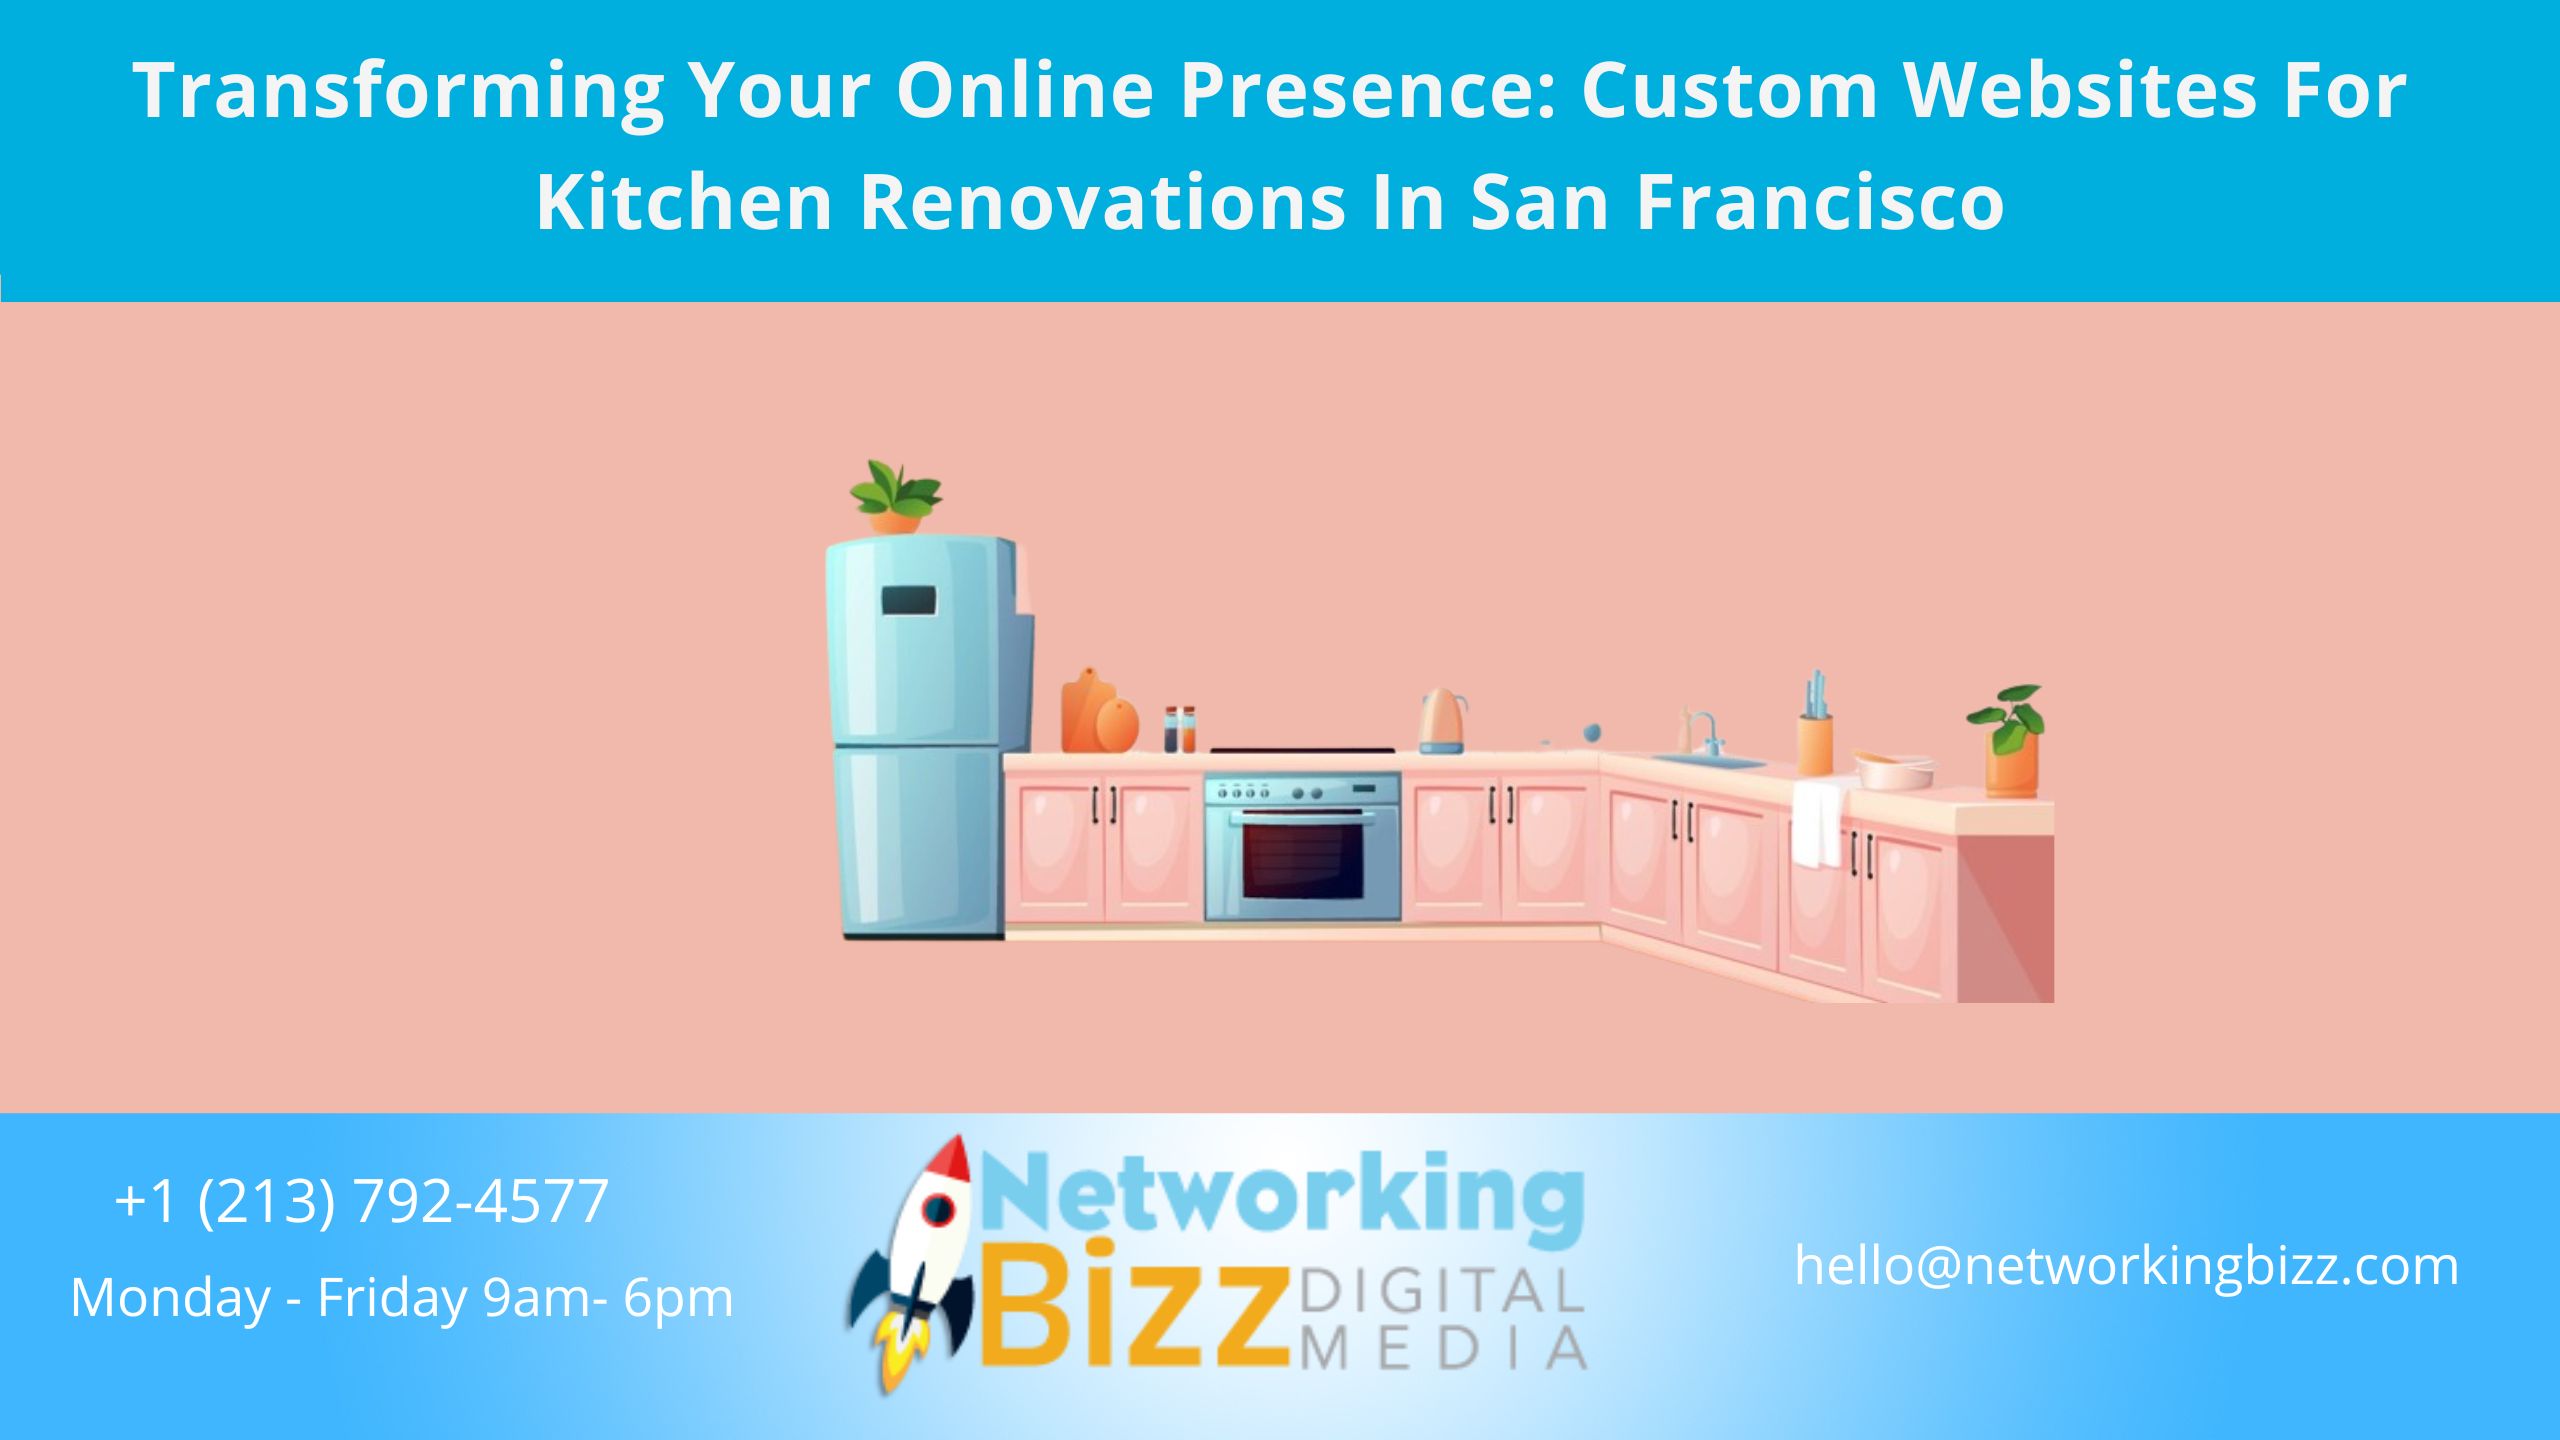 Transforming Your Online Presence: Custom Websites For Kitchen Renovations In San Francisco